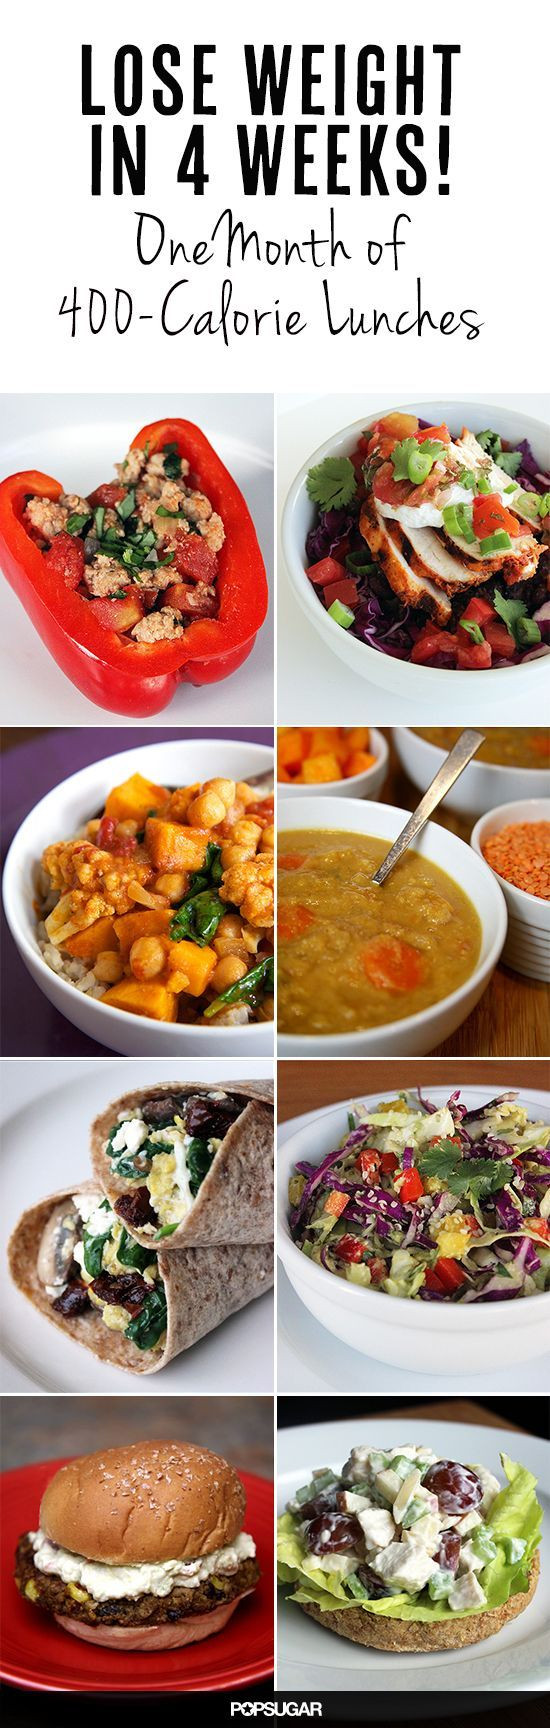 Healthy Lunches Under 400 Calories
 Stay Healthy Eat Clean 1 Month of 400 Calorie Lunches